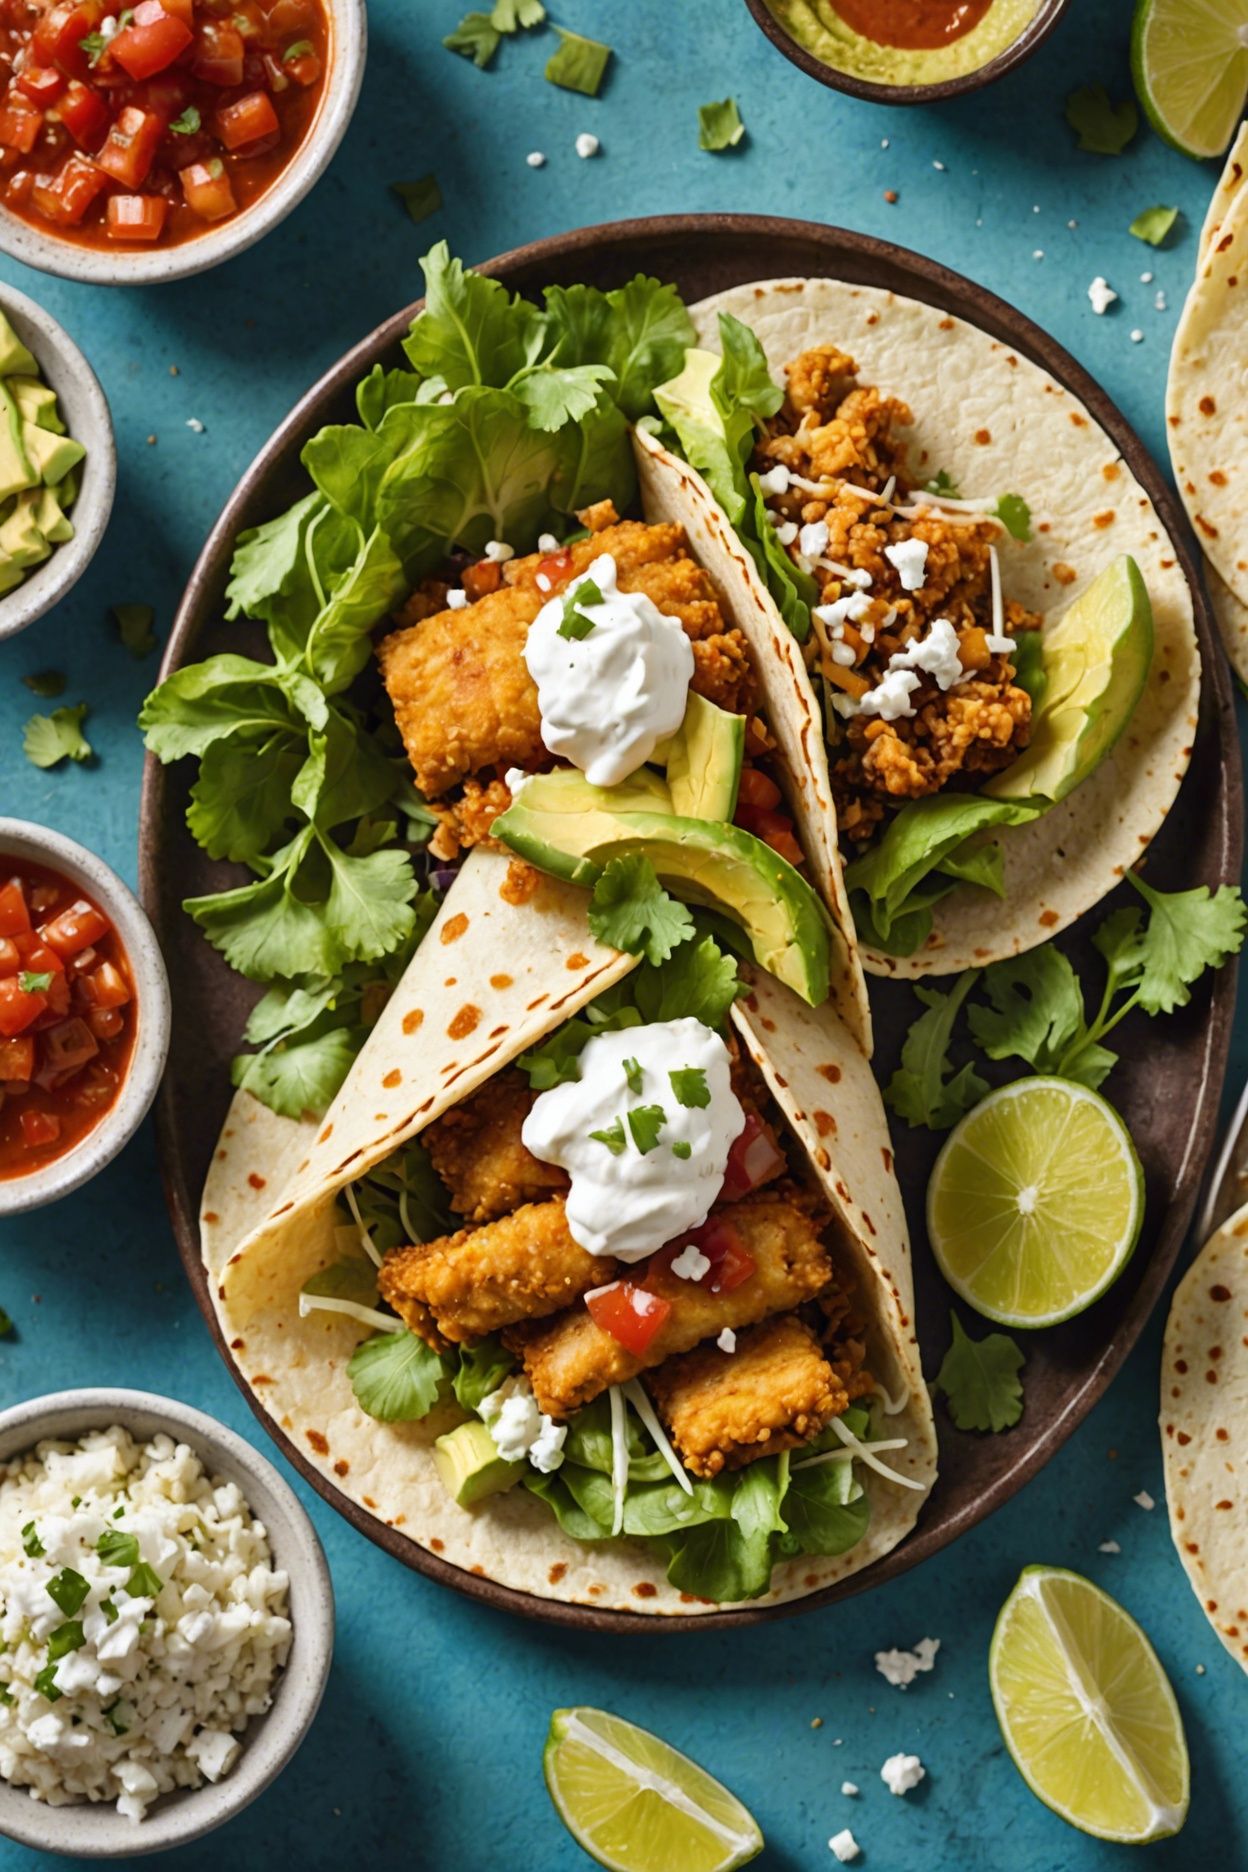 Fried Fish Tacos With Chipotle Lime Salsa